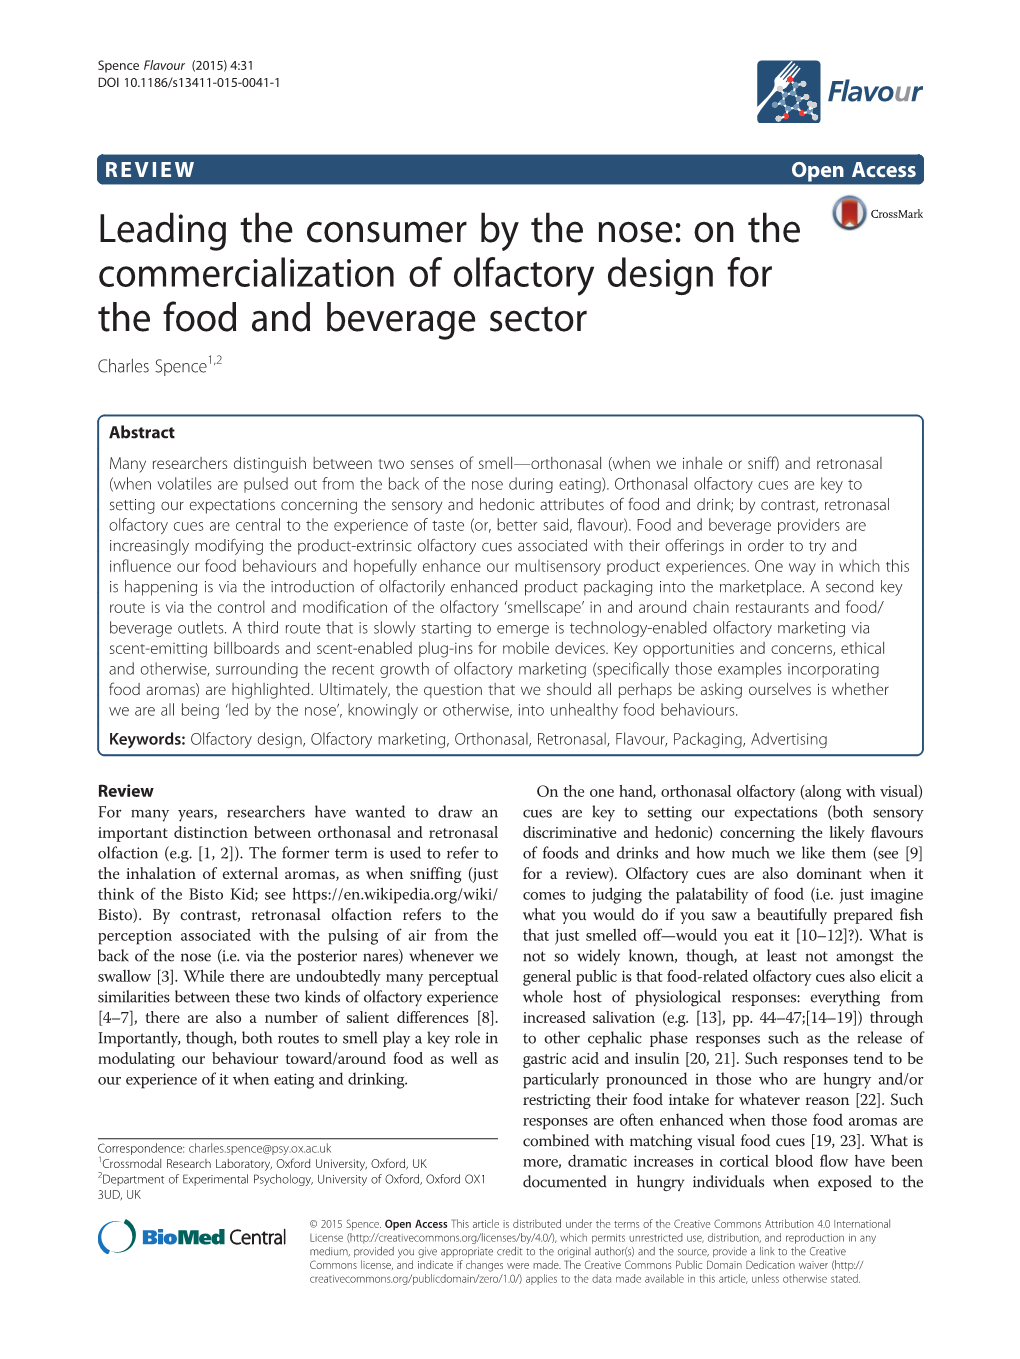 Leading the Consumer by the Nose: on the Commercialization of Olfactory Design for the Food and Beverage Sector Charles Spence1,2